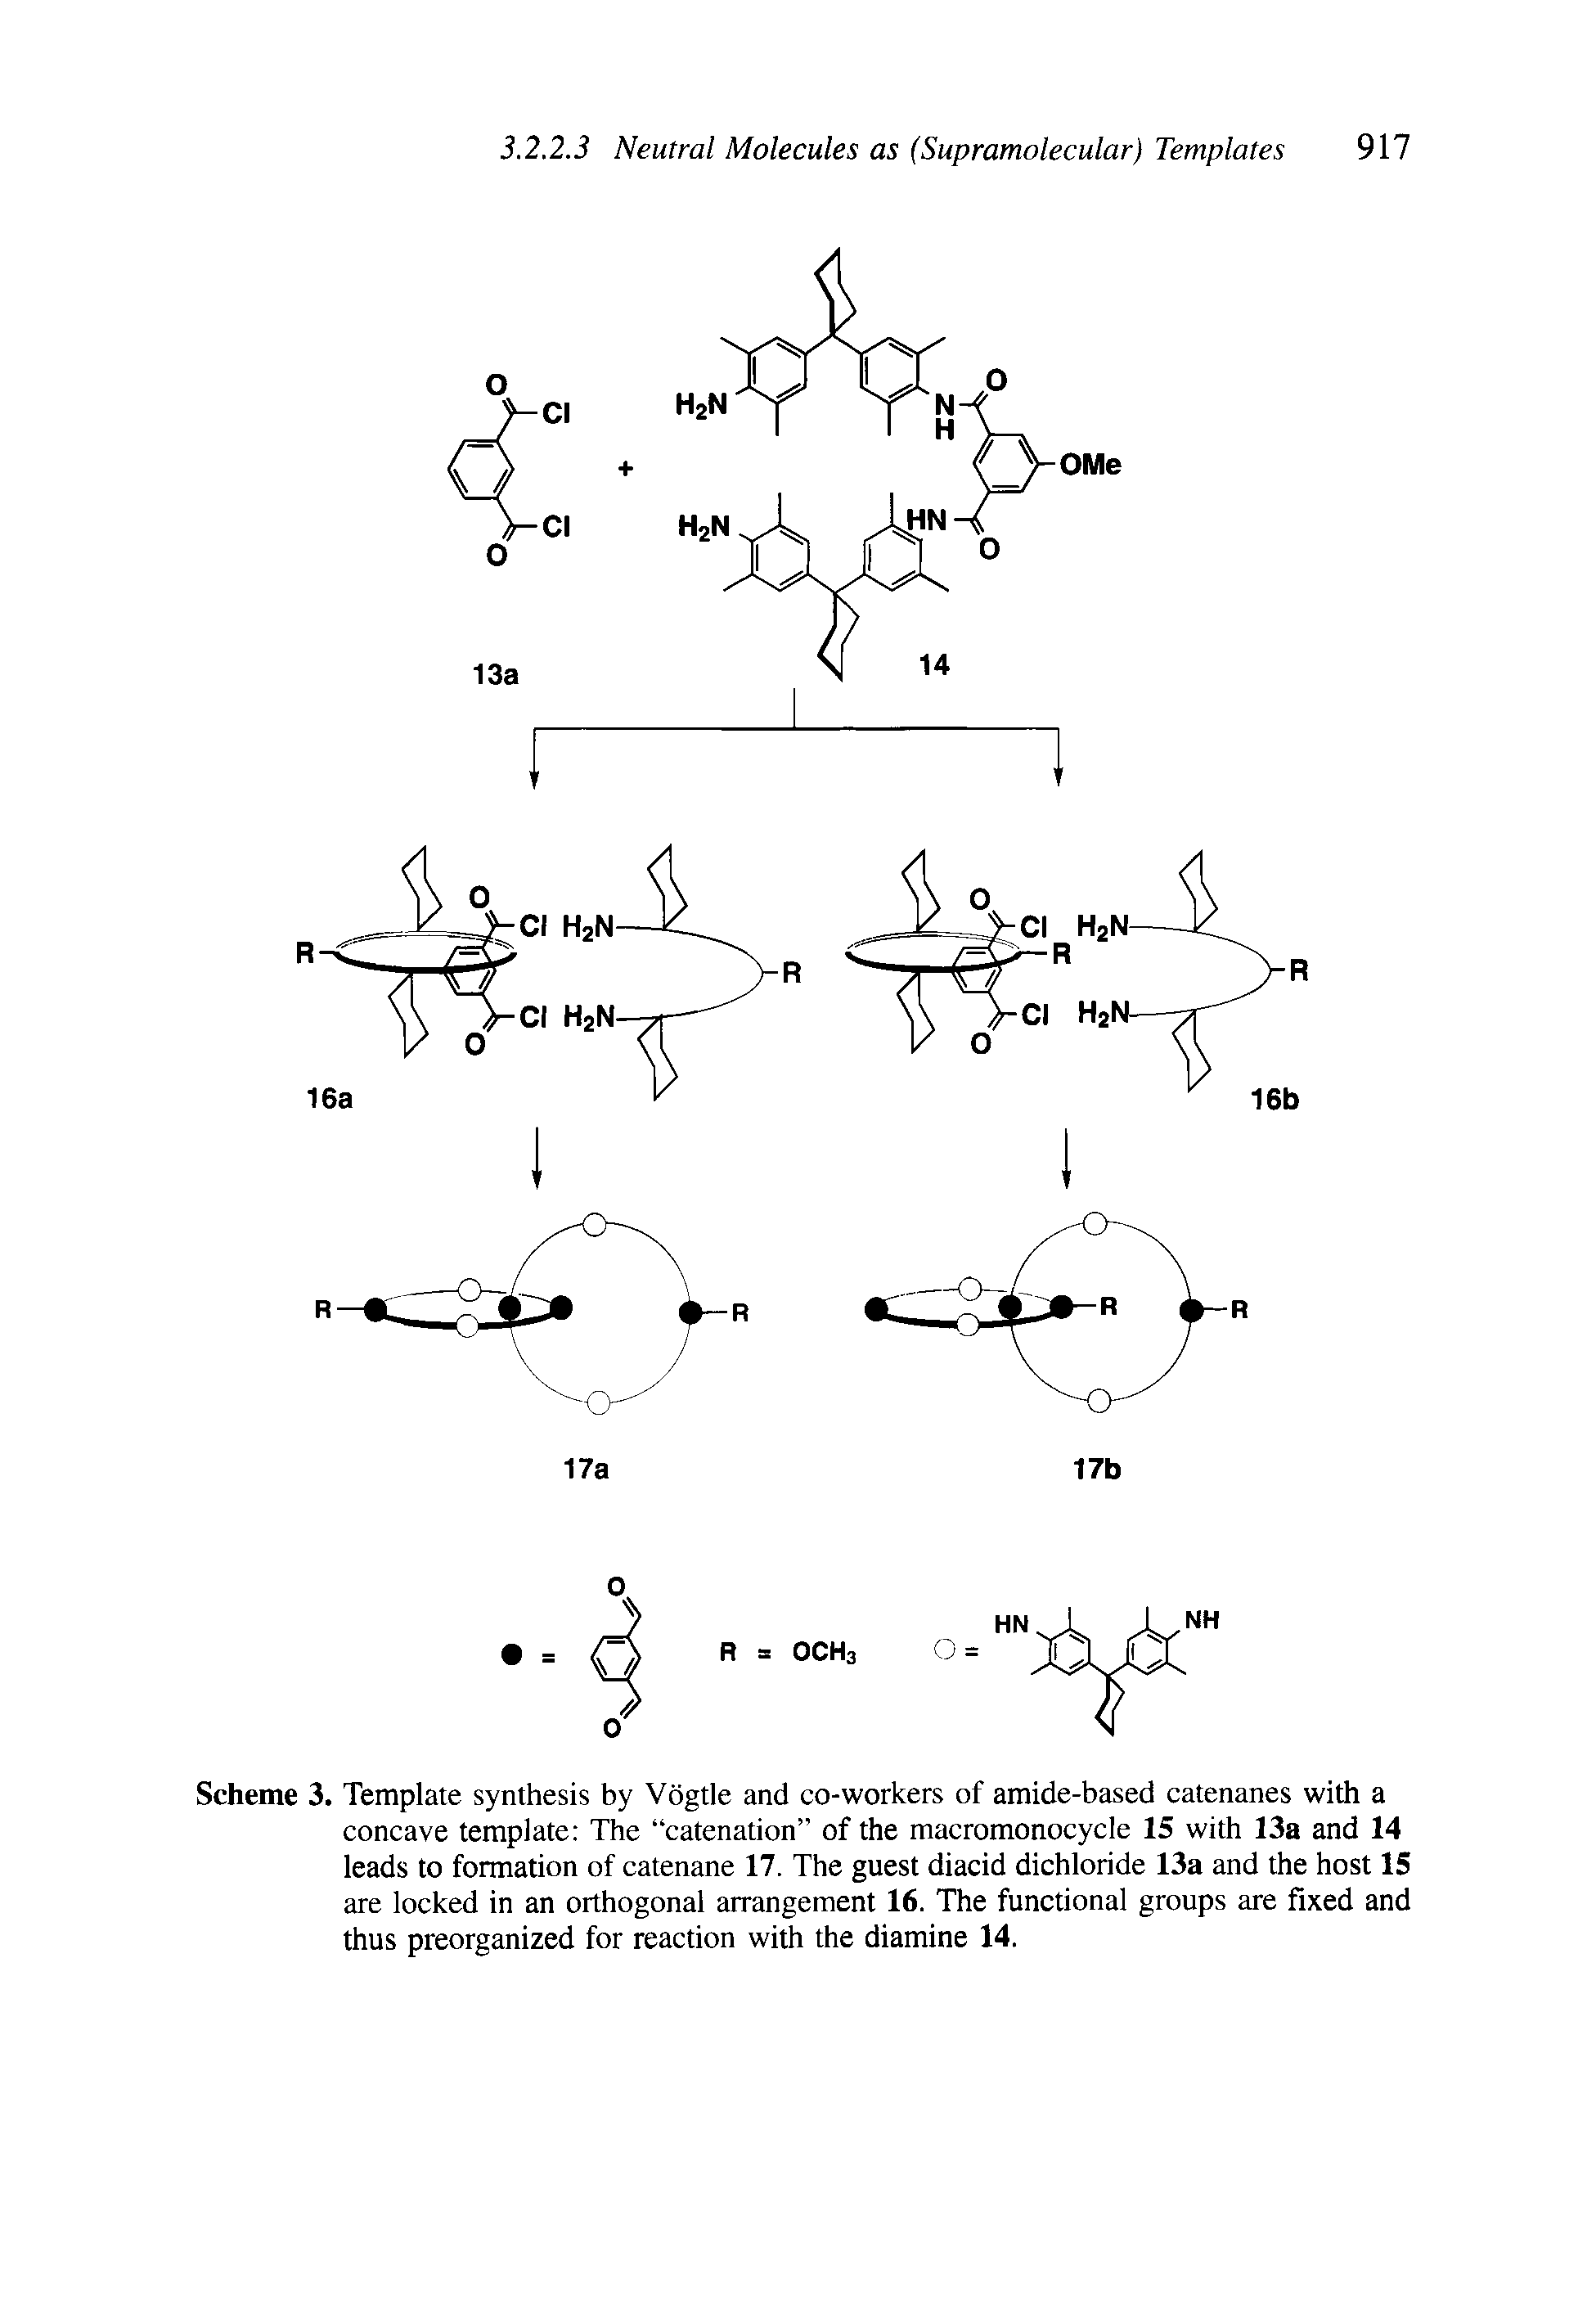 Scheme 3. Template synthesis by Vogtie and co-workers of amide-based catenanes with a concave template The catenation of the macromonocycle 15 with 13a and 14 leads to formation of catenane 17. The guest diacid dichloride 13a and the host 15 are locked in an orthogonal arrangement 16. The functional groups are fixed and thus preorganized for reaction with the diamine 14.